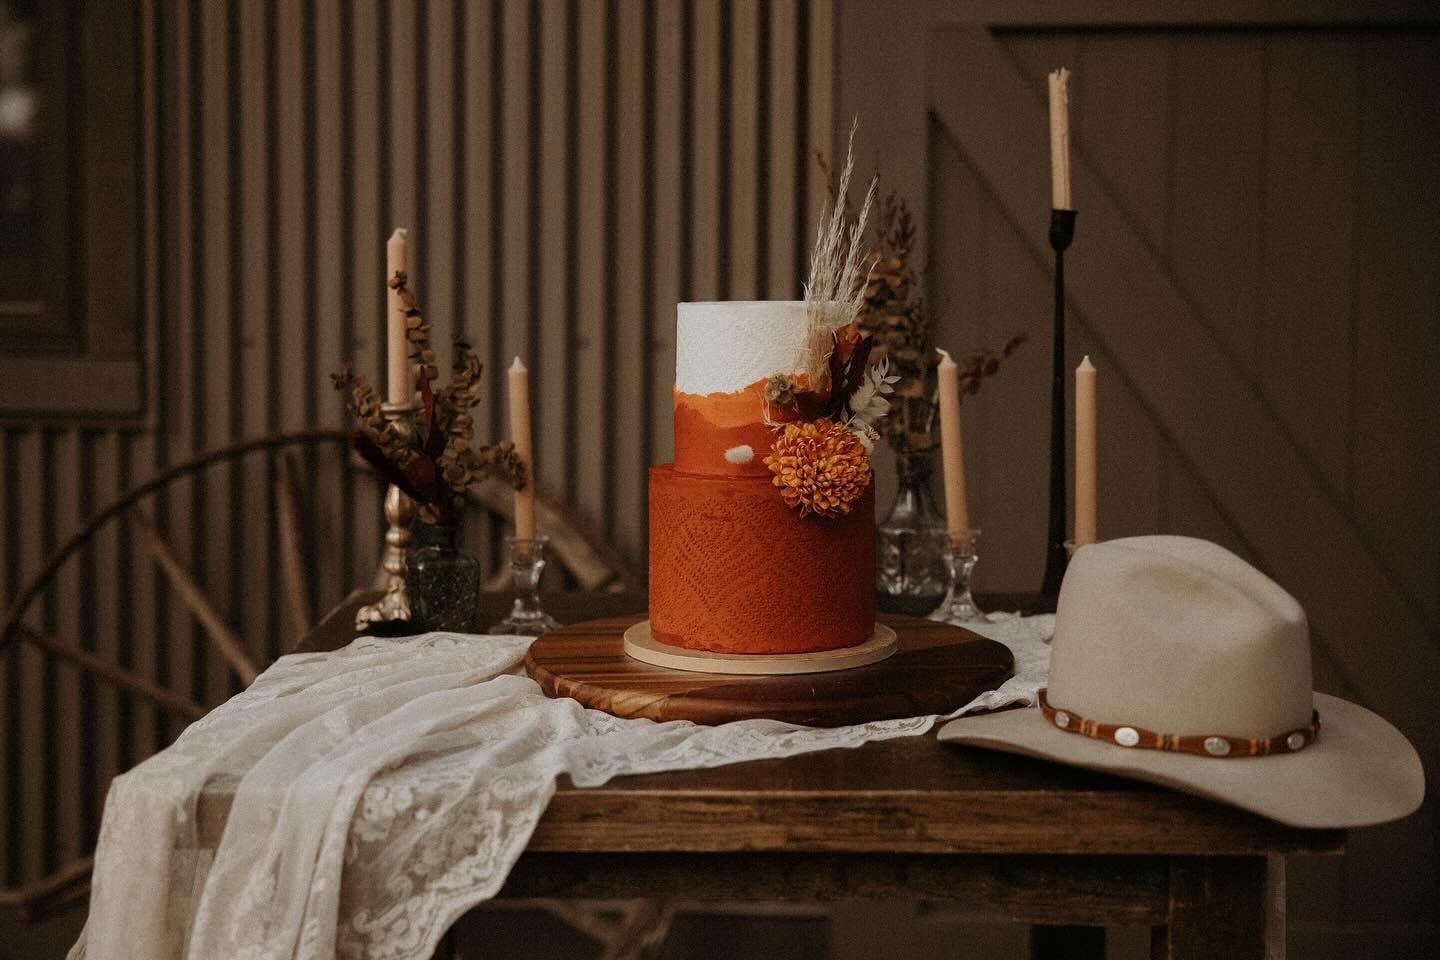 Absolutely in love with the color + raw edge + stencil combo 🤩
.
.
.
.
#guiddyup #montanawedding #westernwedding #stencilcake #weddingcake